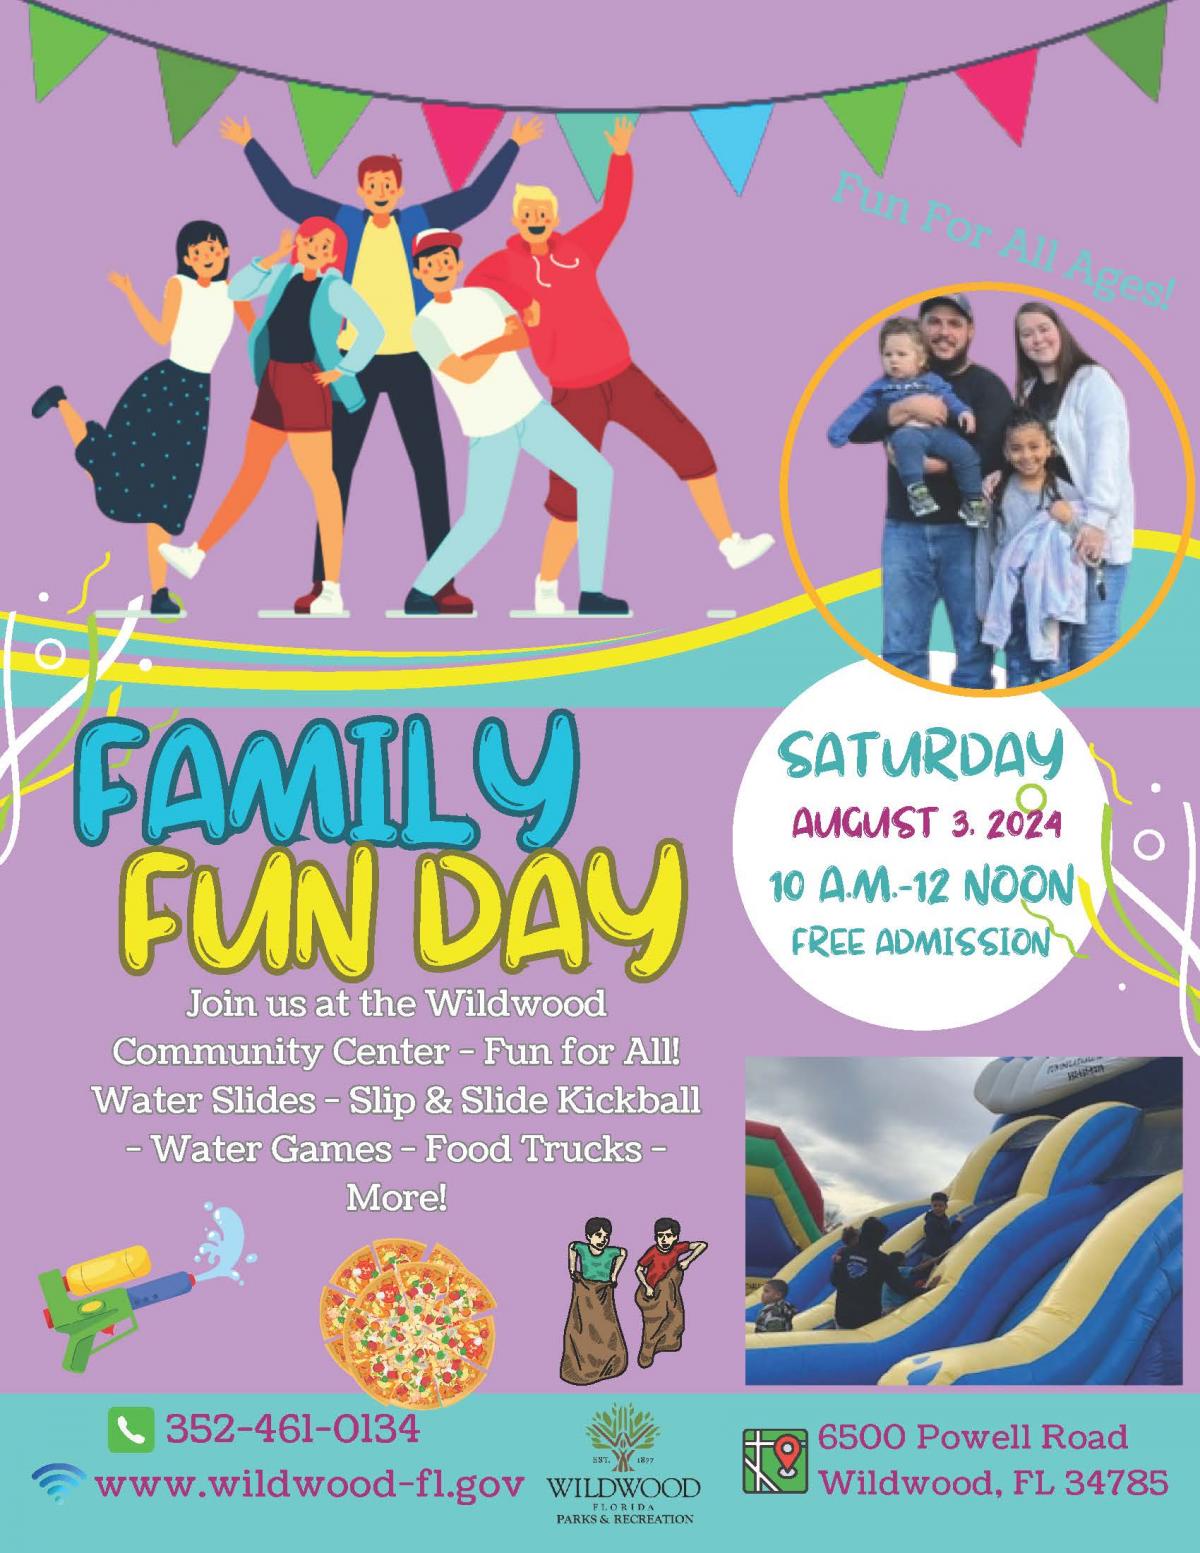 Family Fun Day, Wildwood Community Center, 6500 Powell Road, Wildwood, Fl 34785, 10:00 a.m. - 12:00 noon